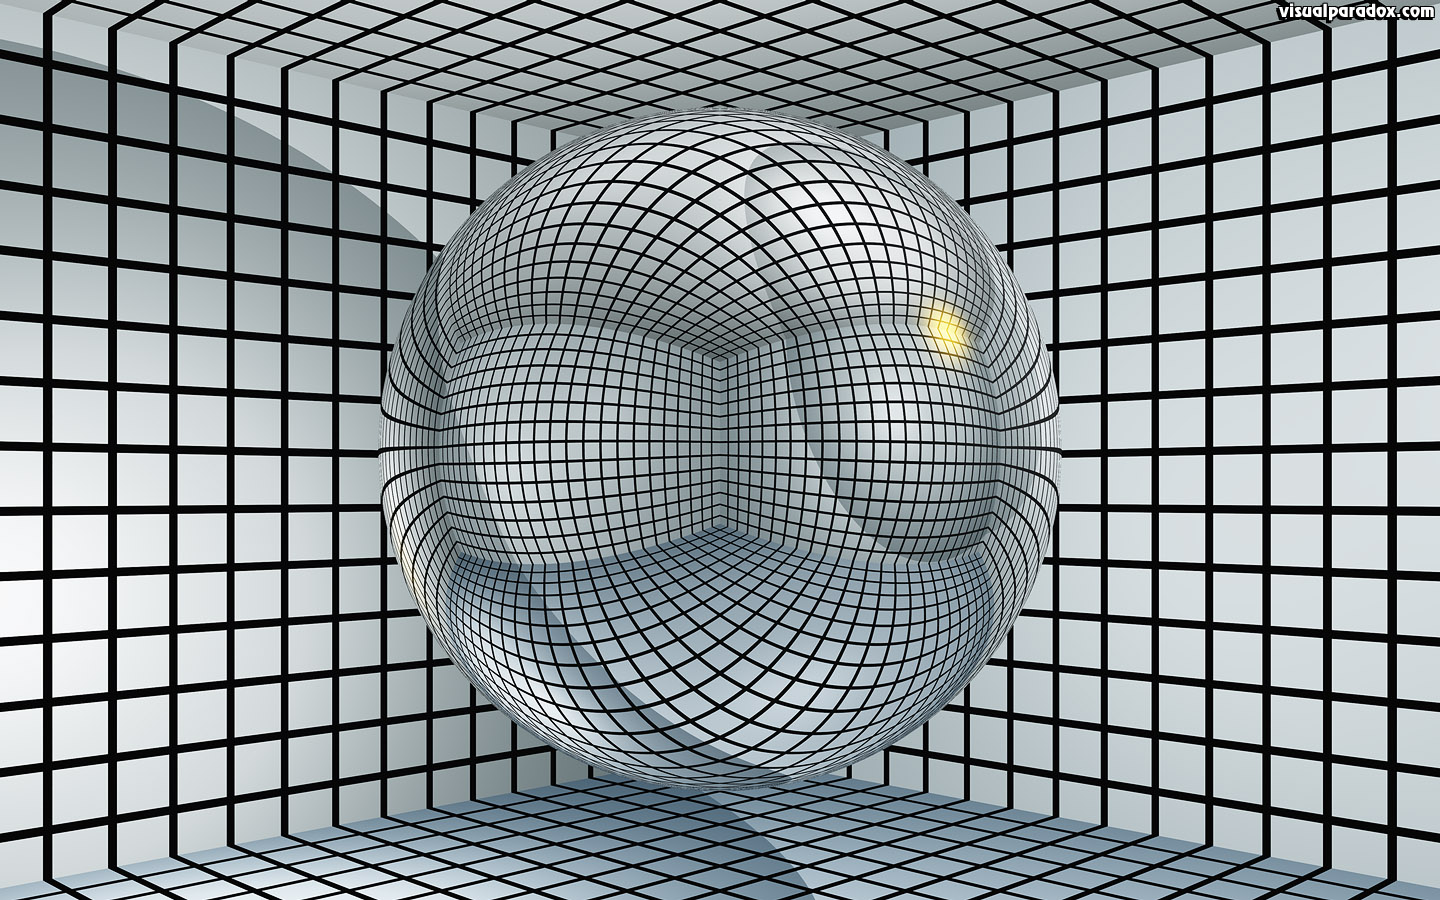 Sphere, ball, grid, black, white, contain, hold, inprison, cell, 3d, wallpaper, widescreen